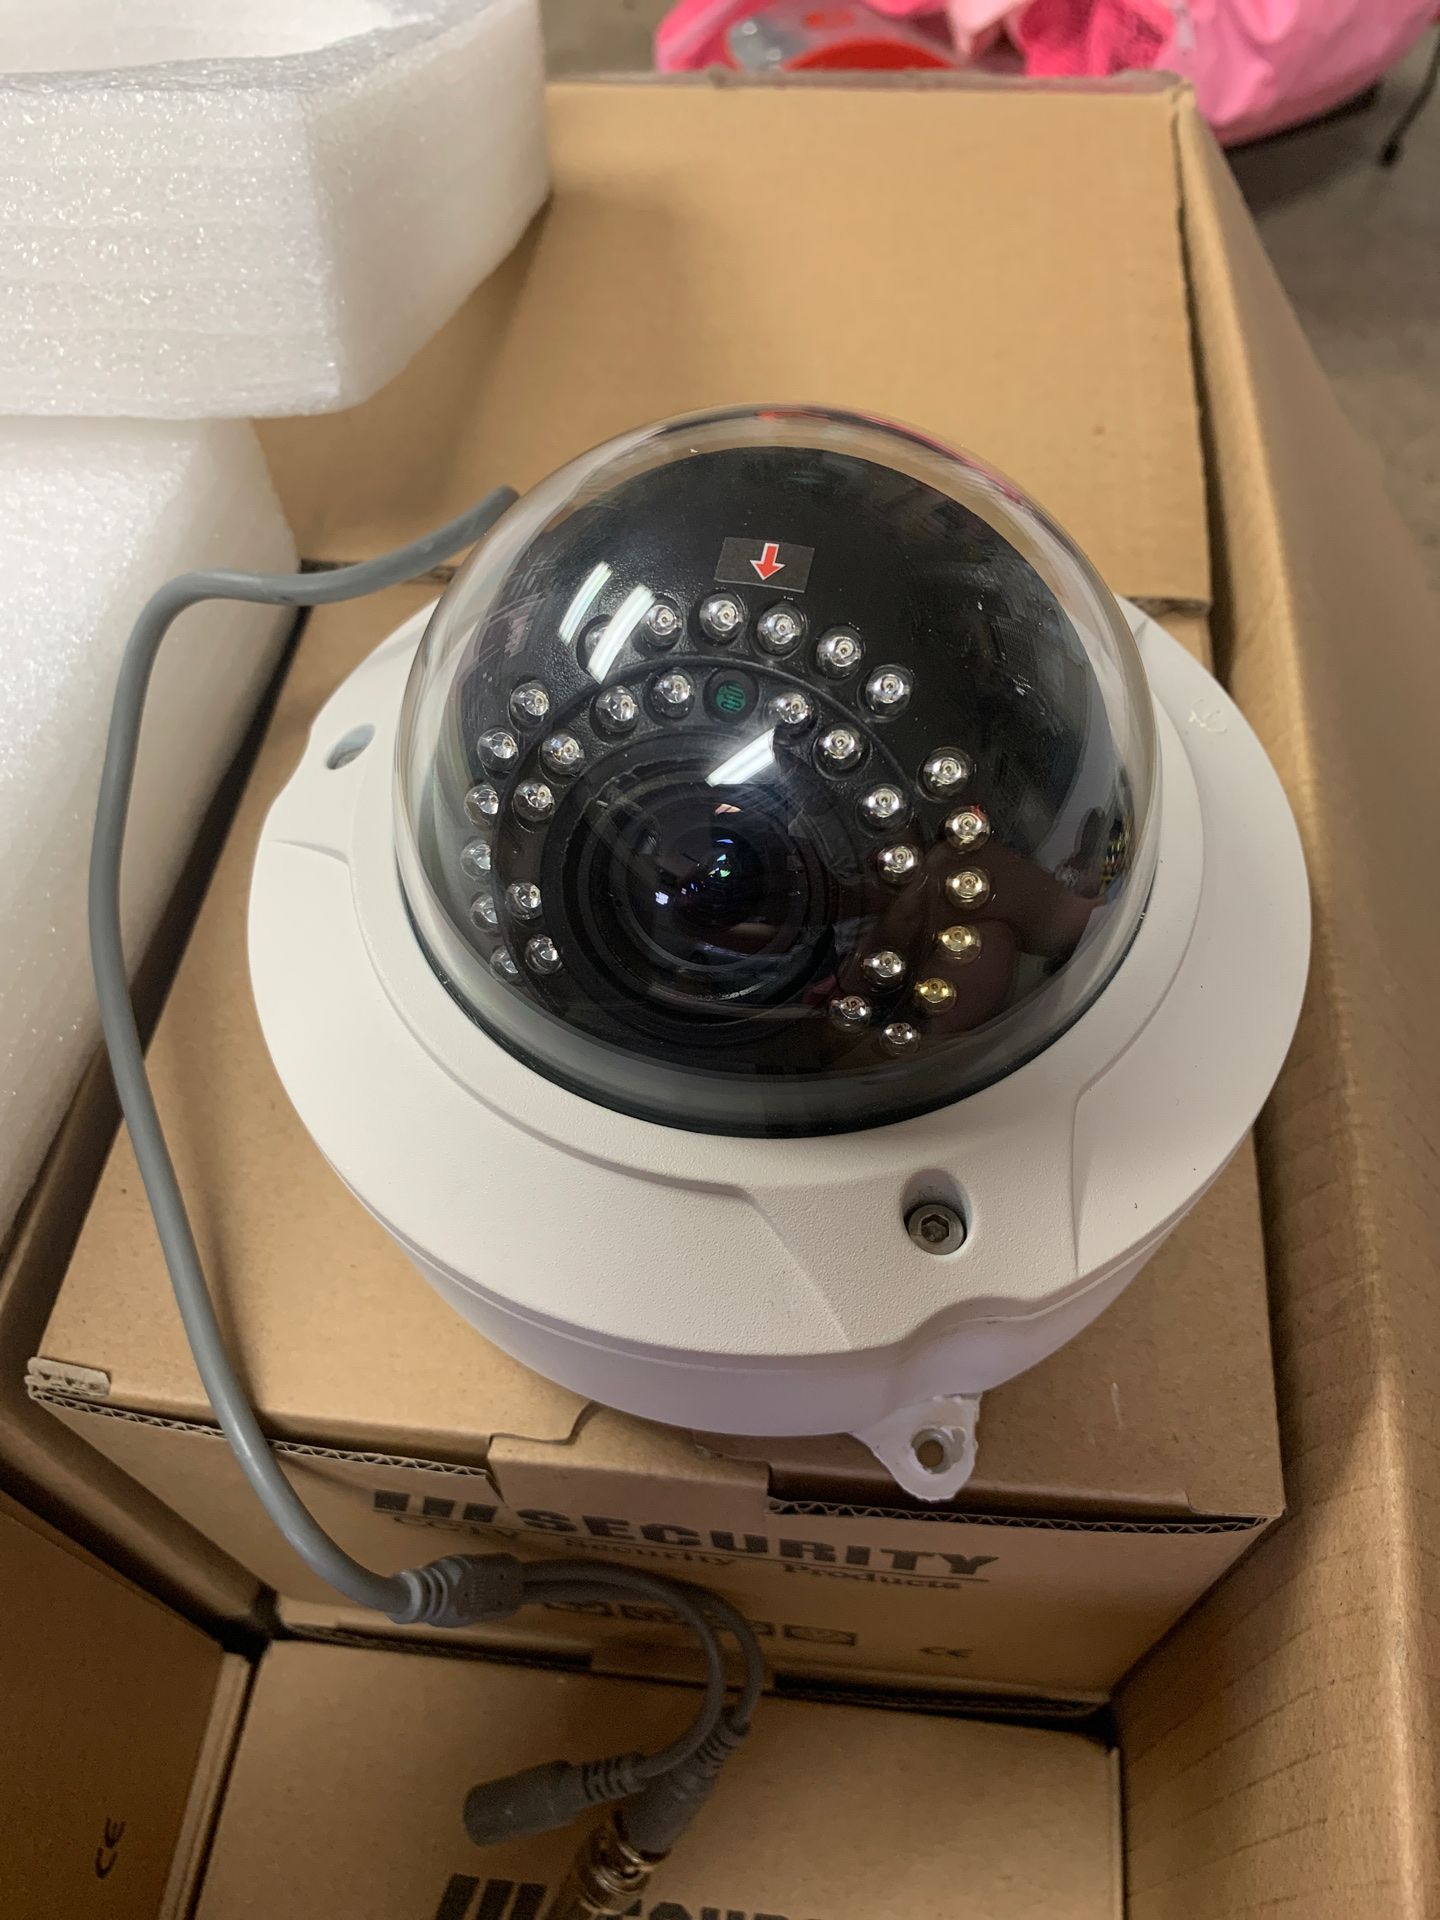 1/3 inch dome home security cameras